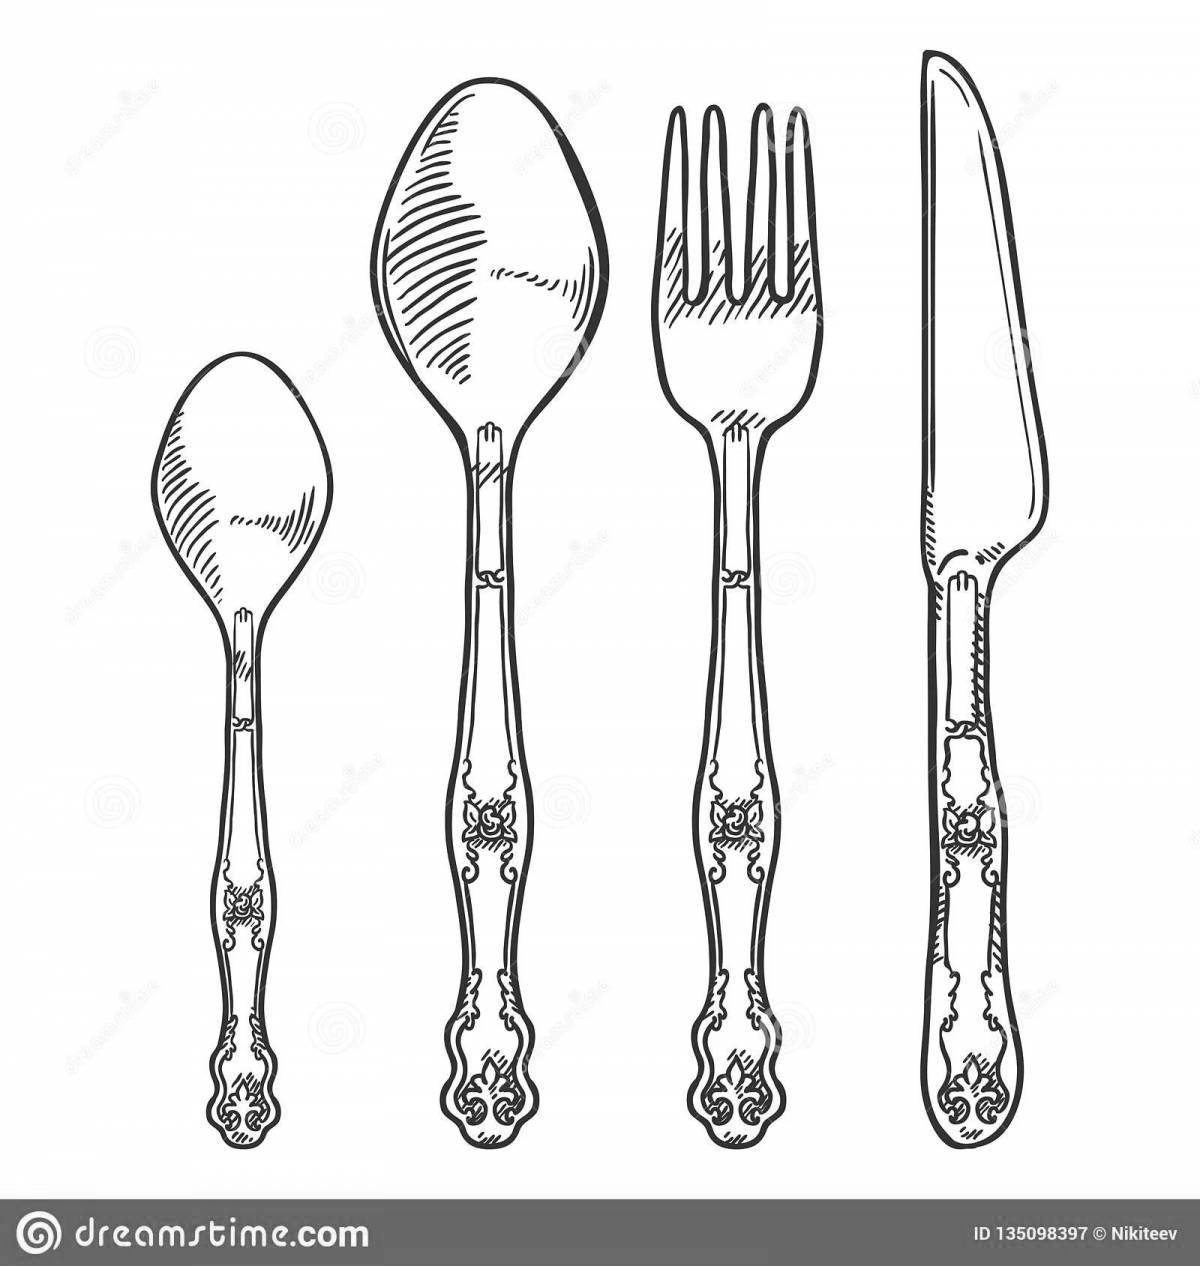 Luminous cutlery coloring page for students